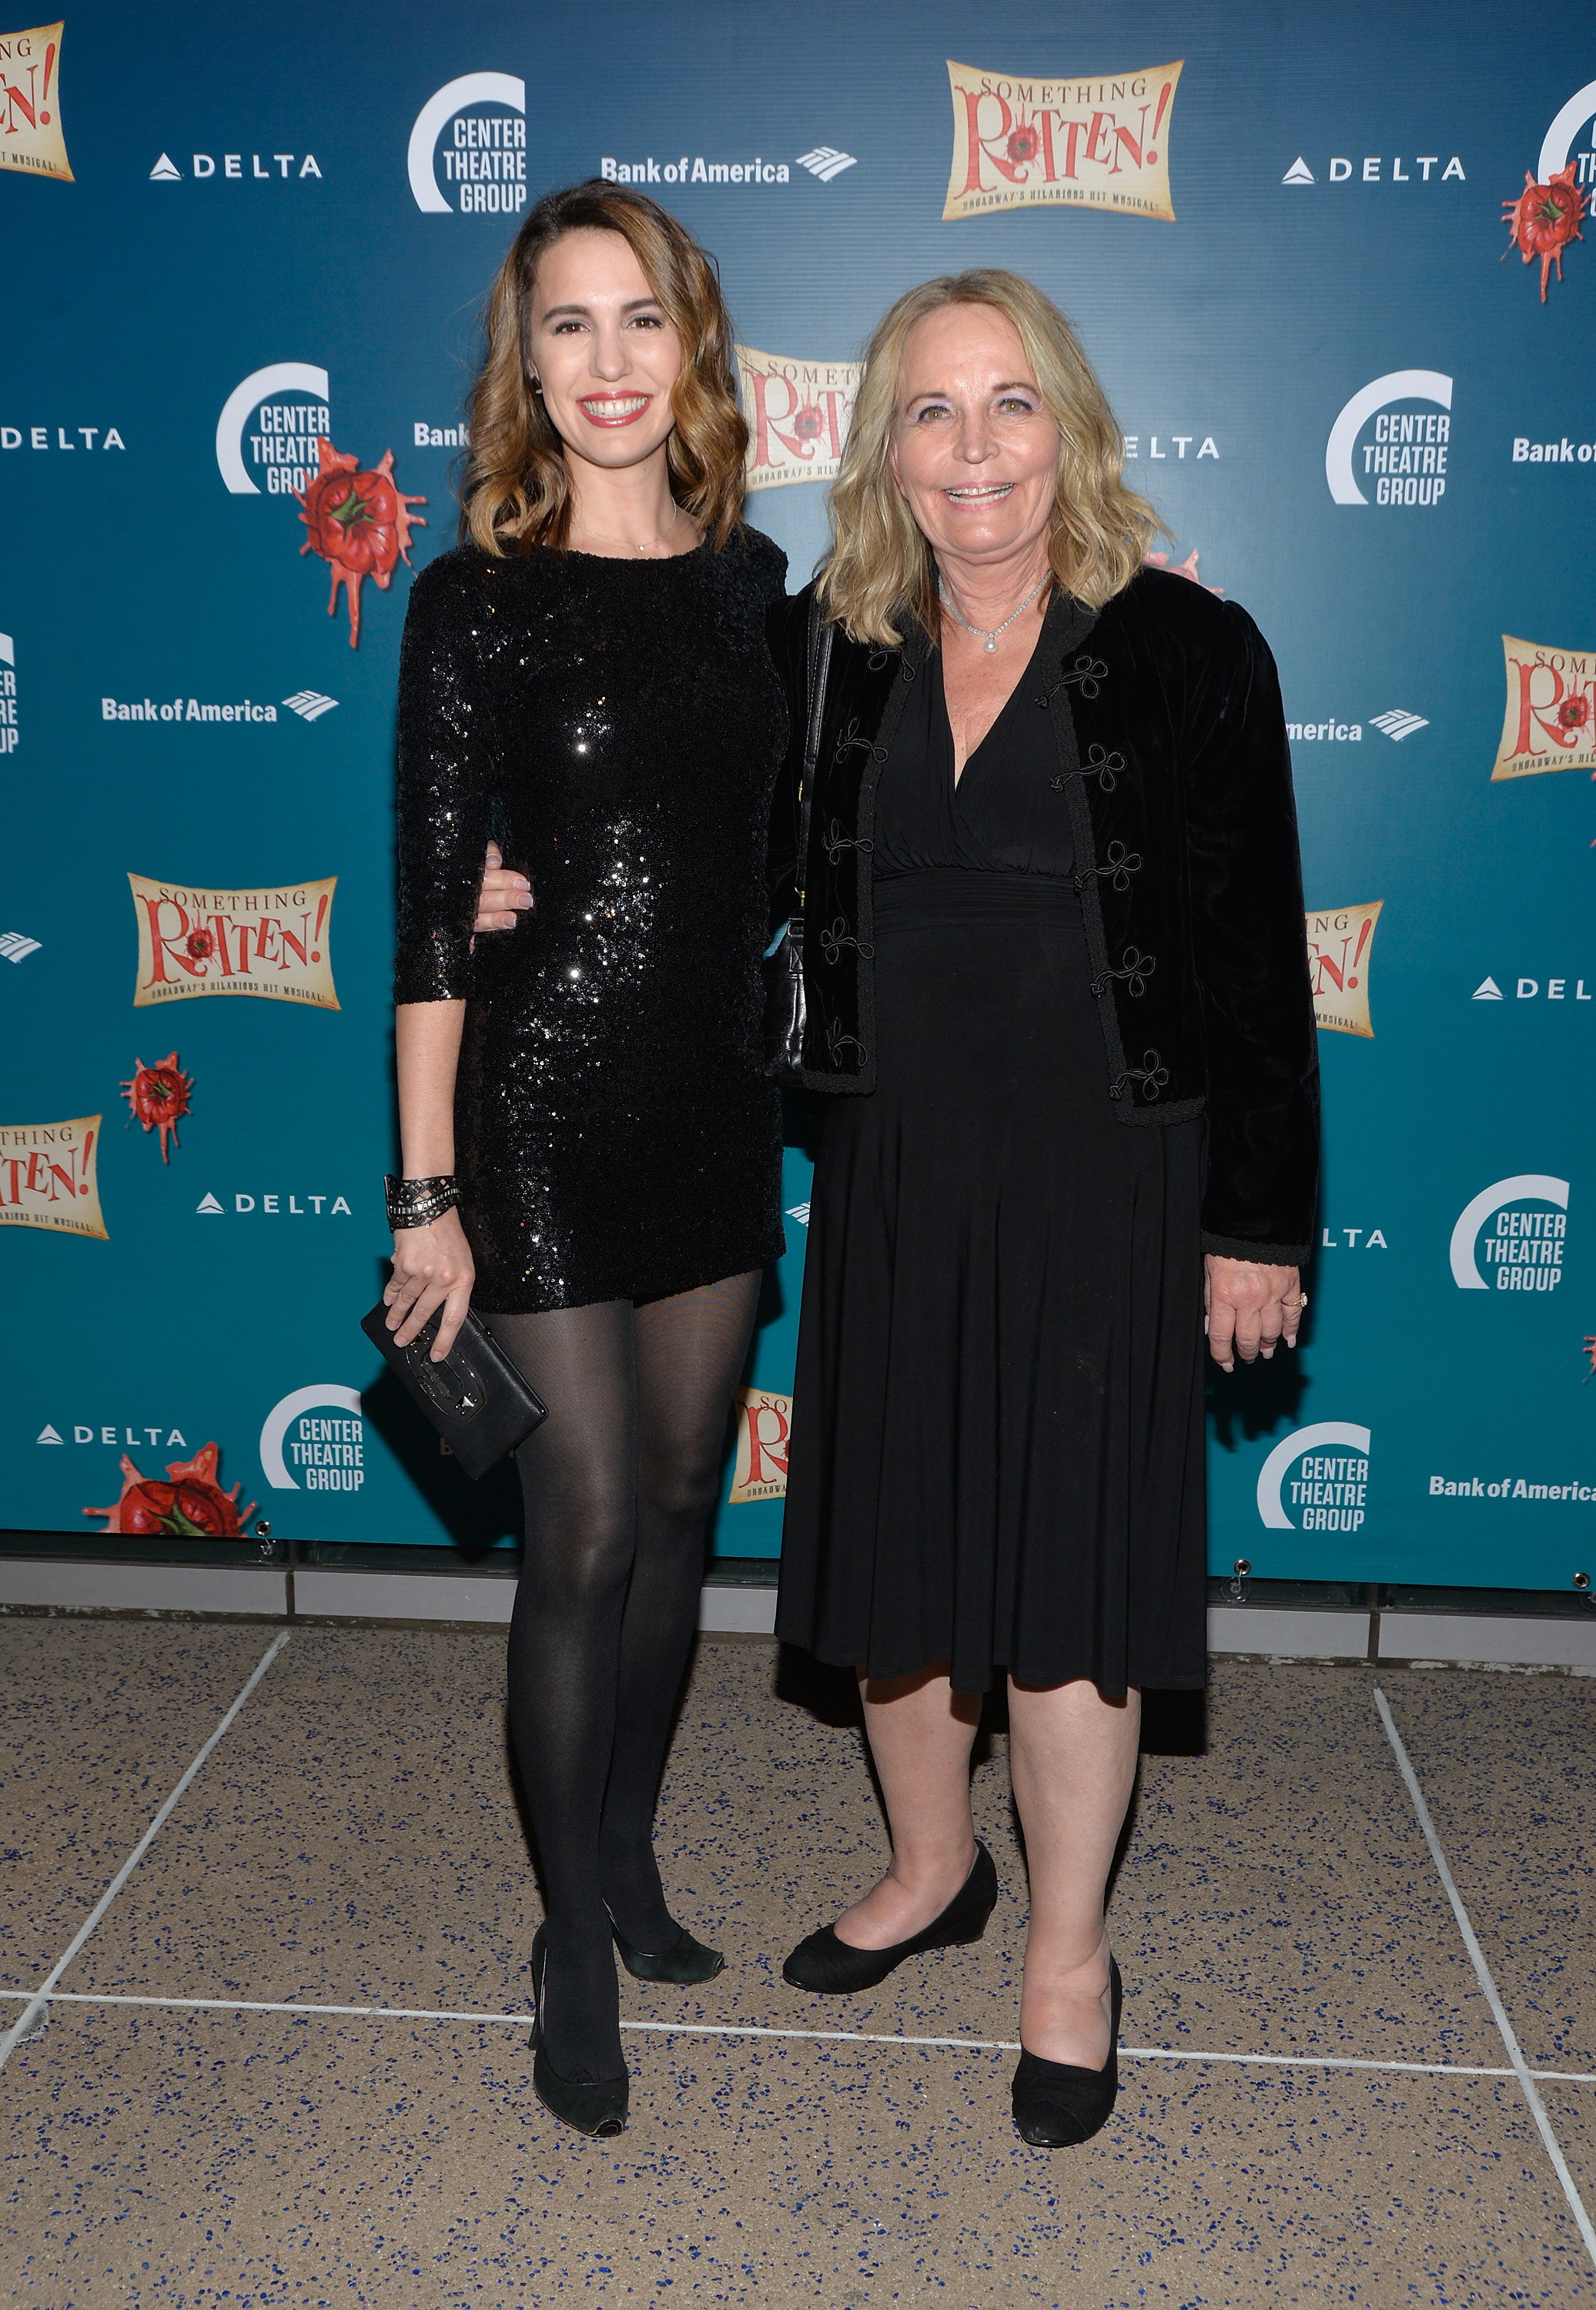 Christy in a sparkly black minidress and tights, with Sharon, in a black dress and patterned jacket, at a media event